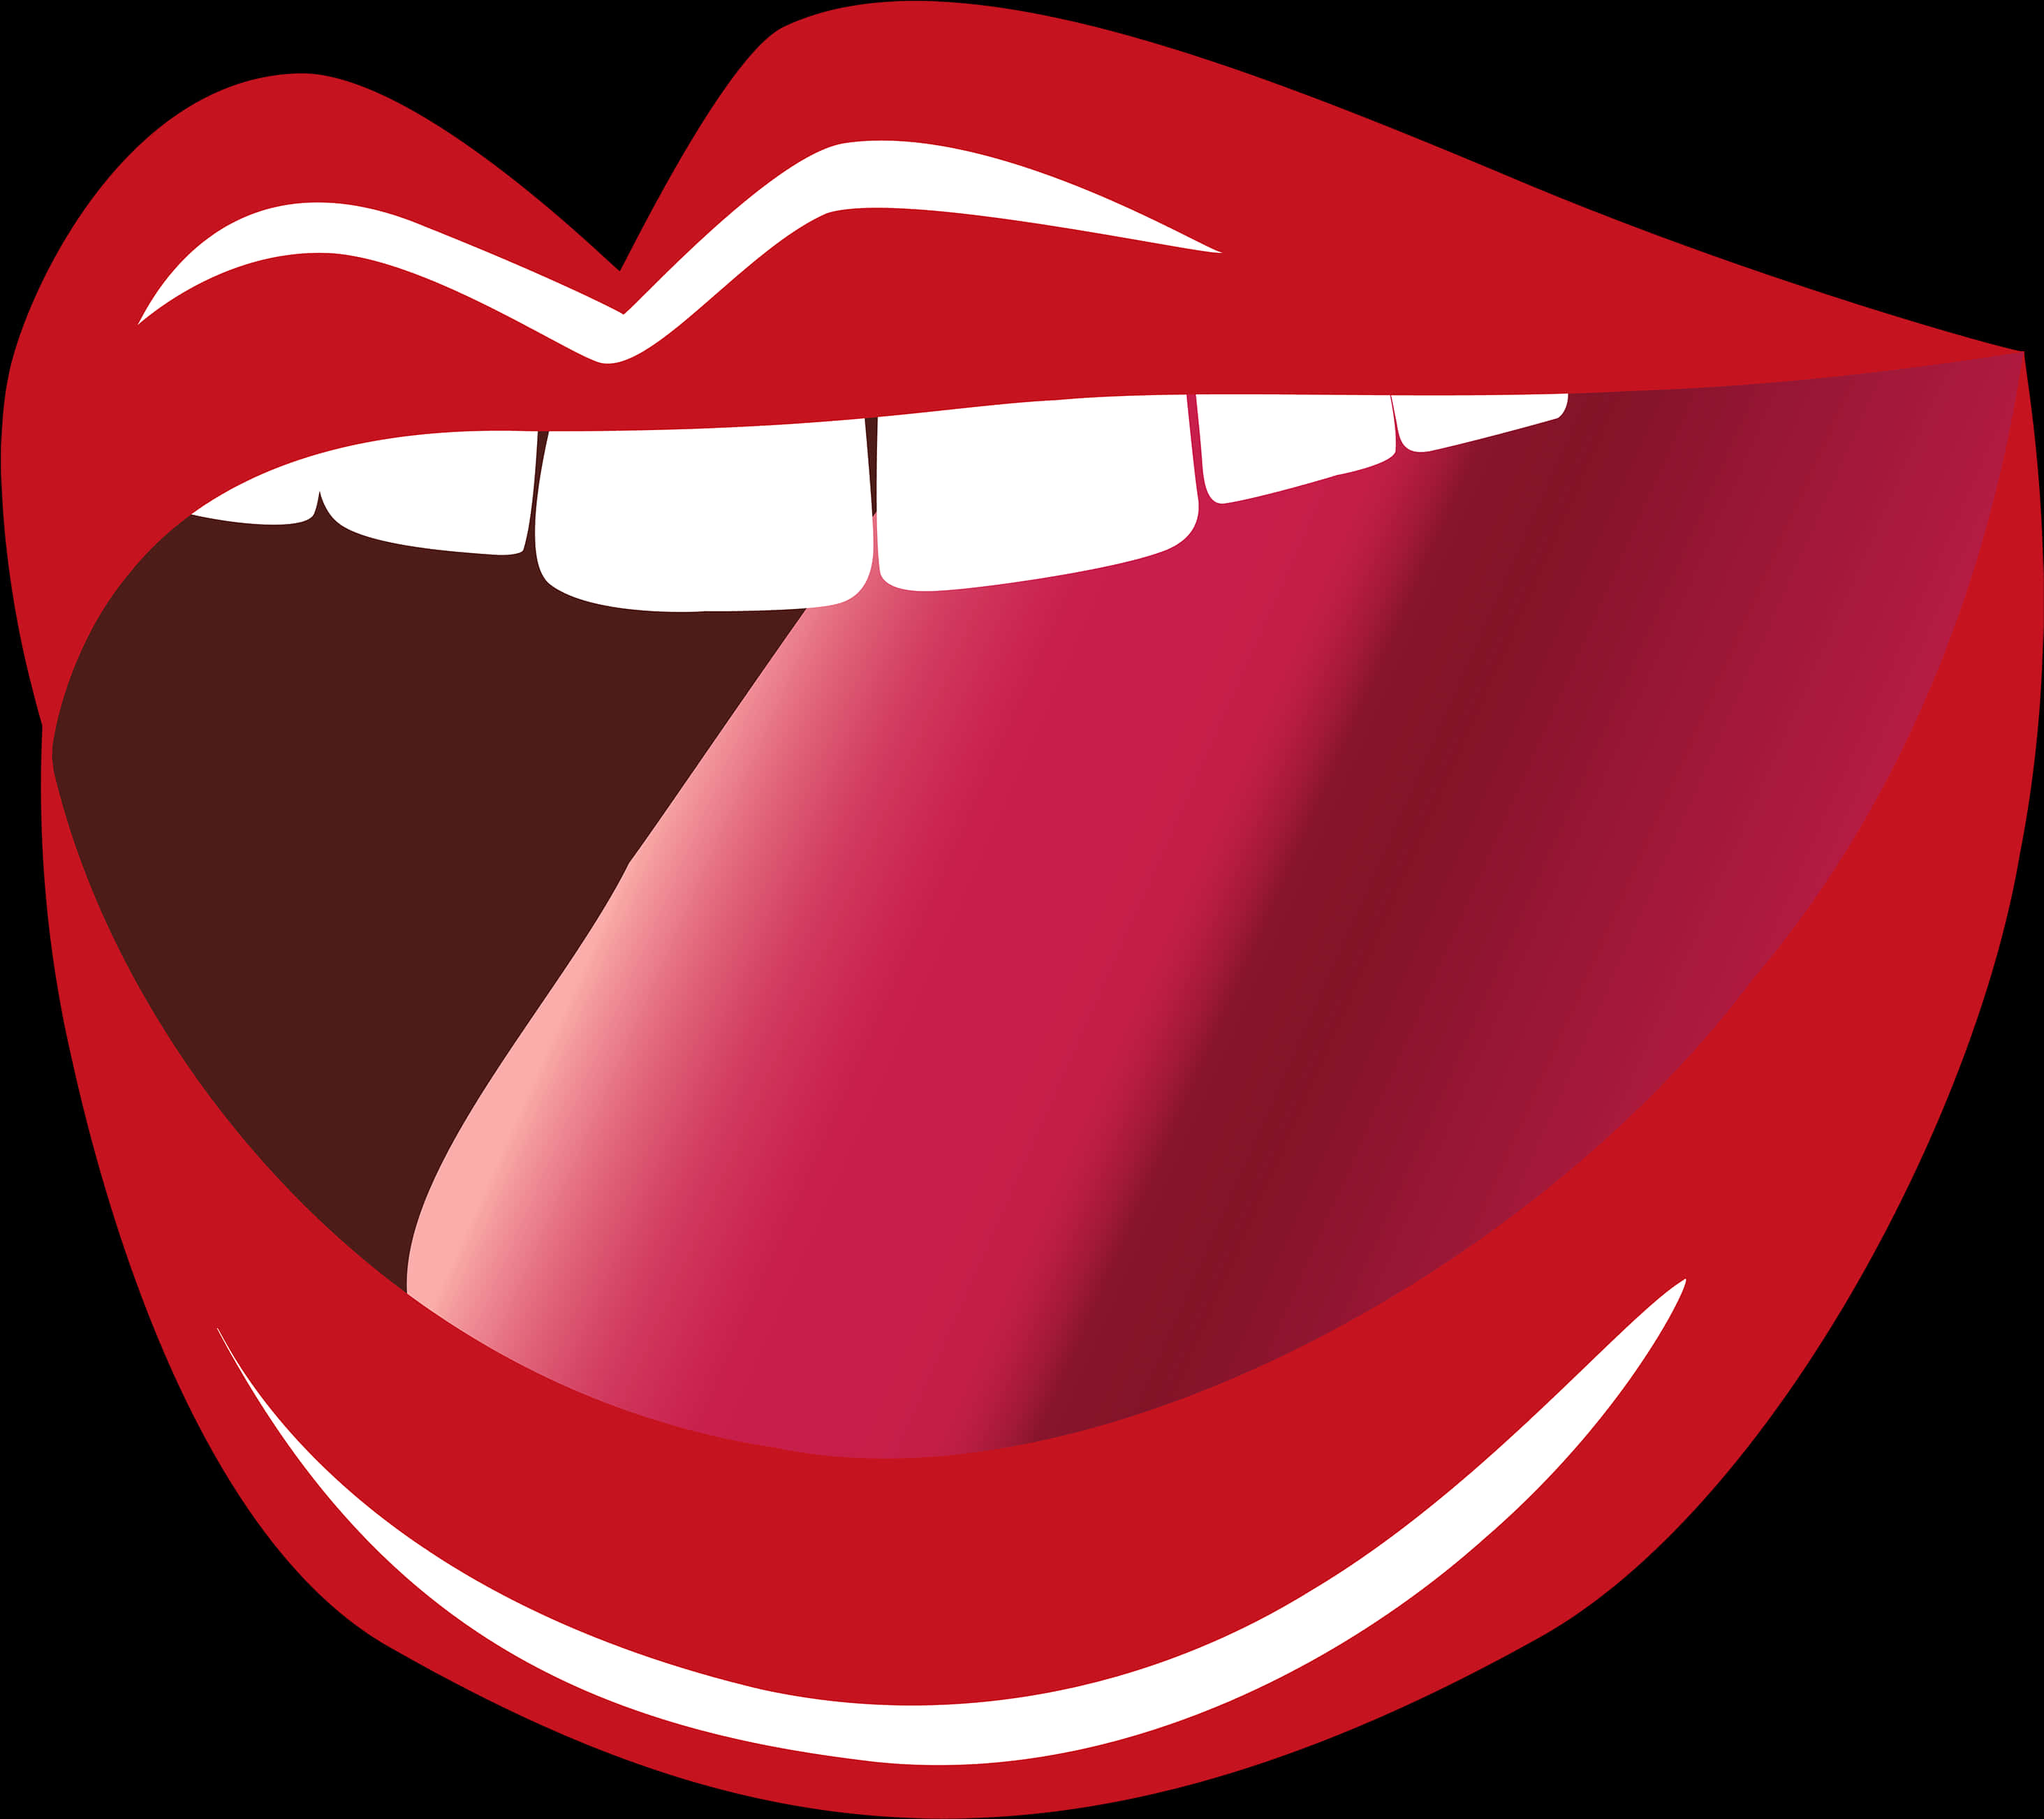 A Red Lips With White Teeth And Tongue Sticking Out